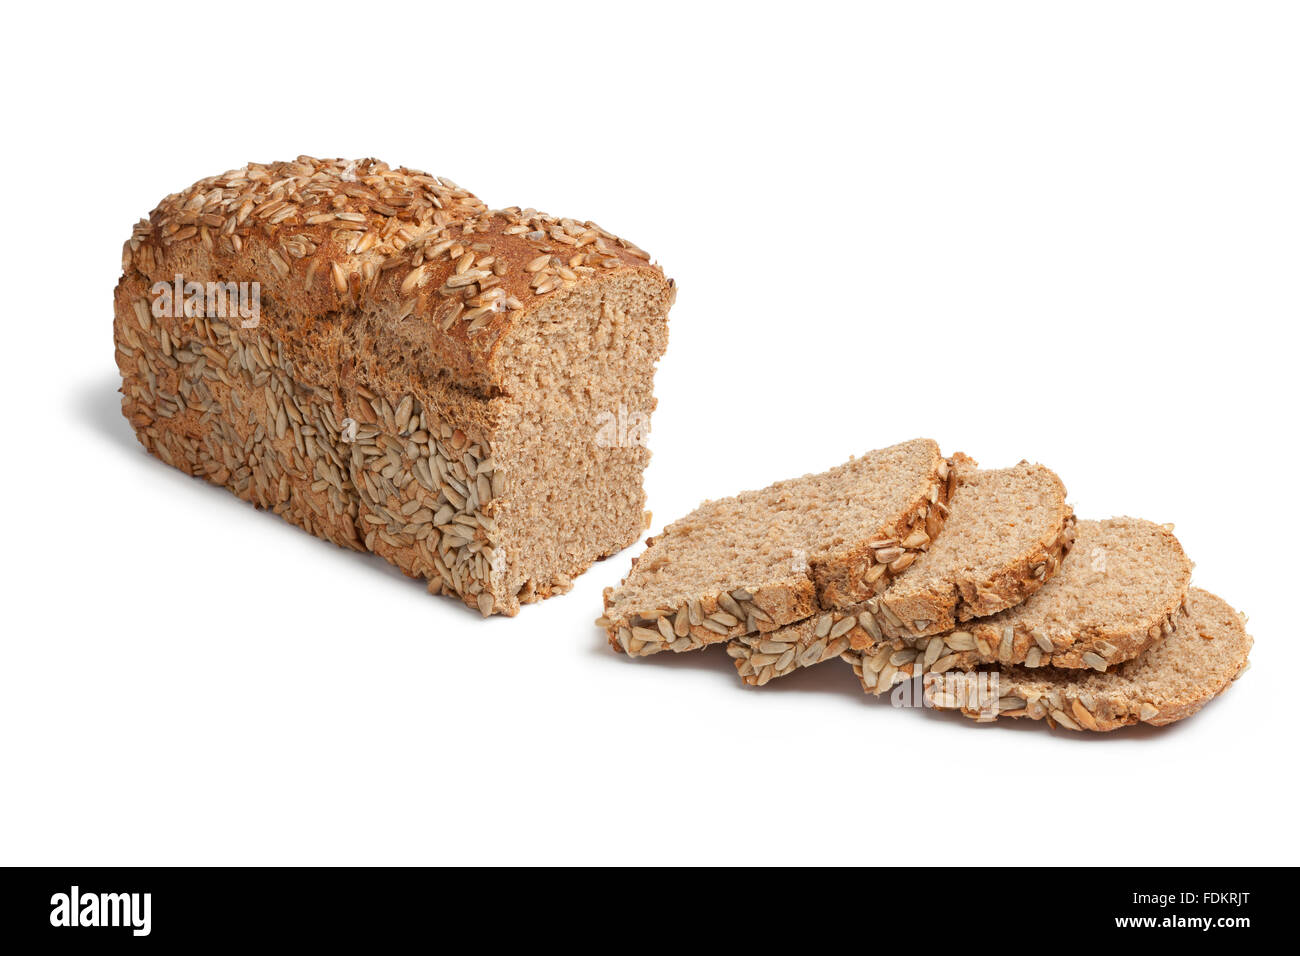 Loaf of spelt bread and slices with sunflower seeds on white background Stock Photo